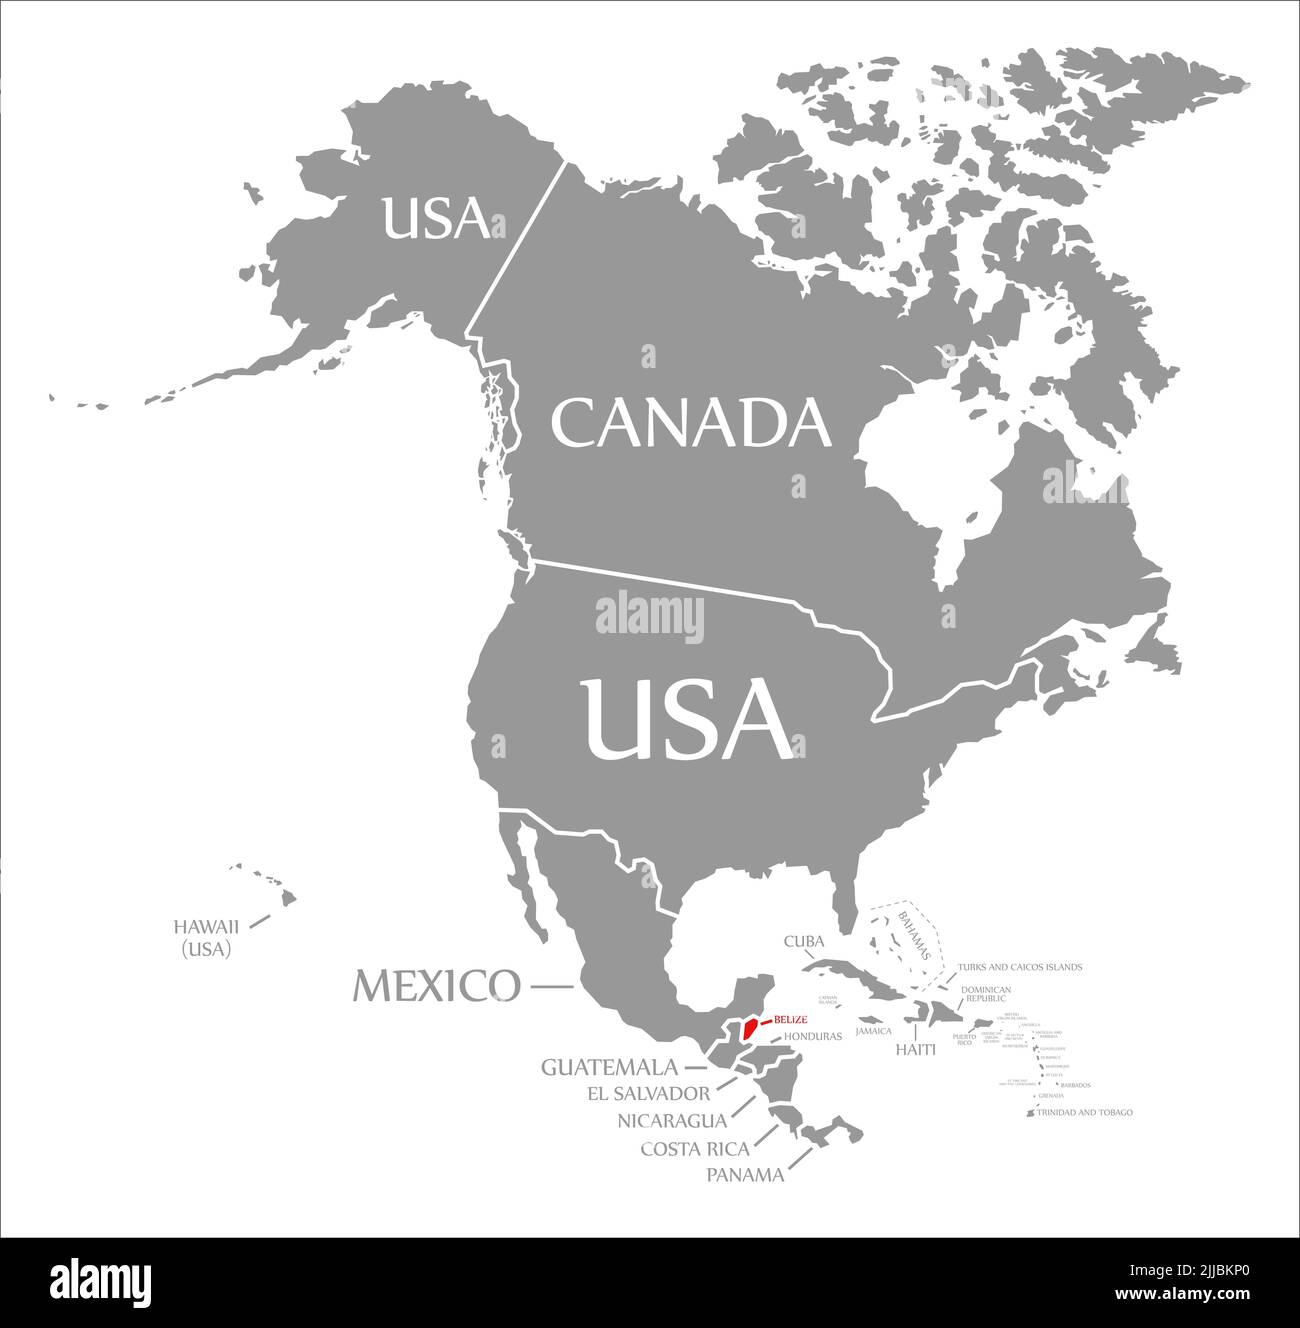 Belize red highlighted in map of North America Stock Photo